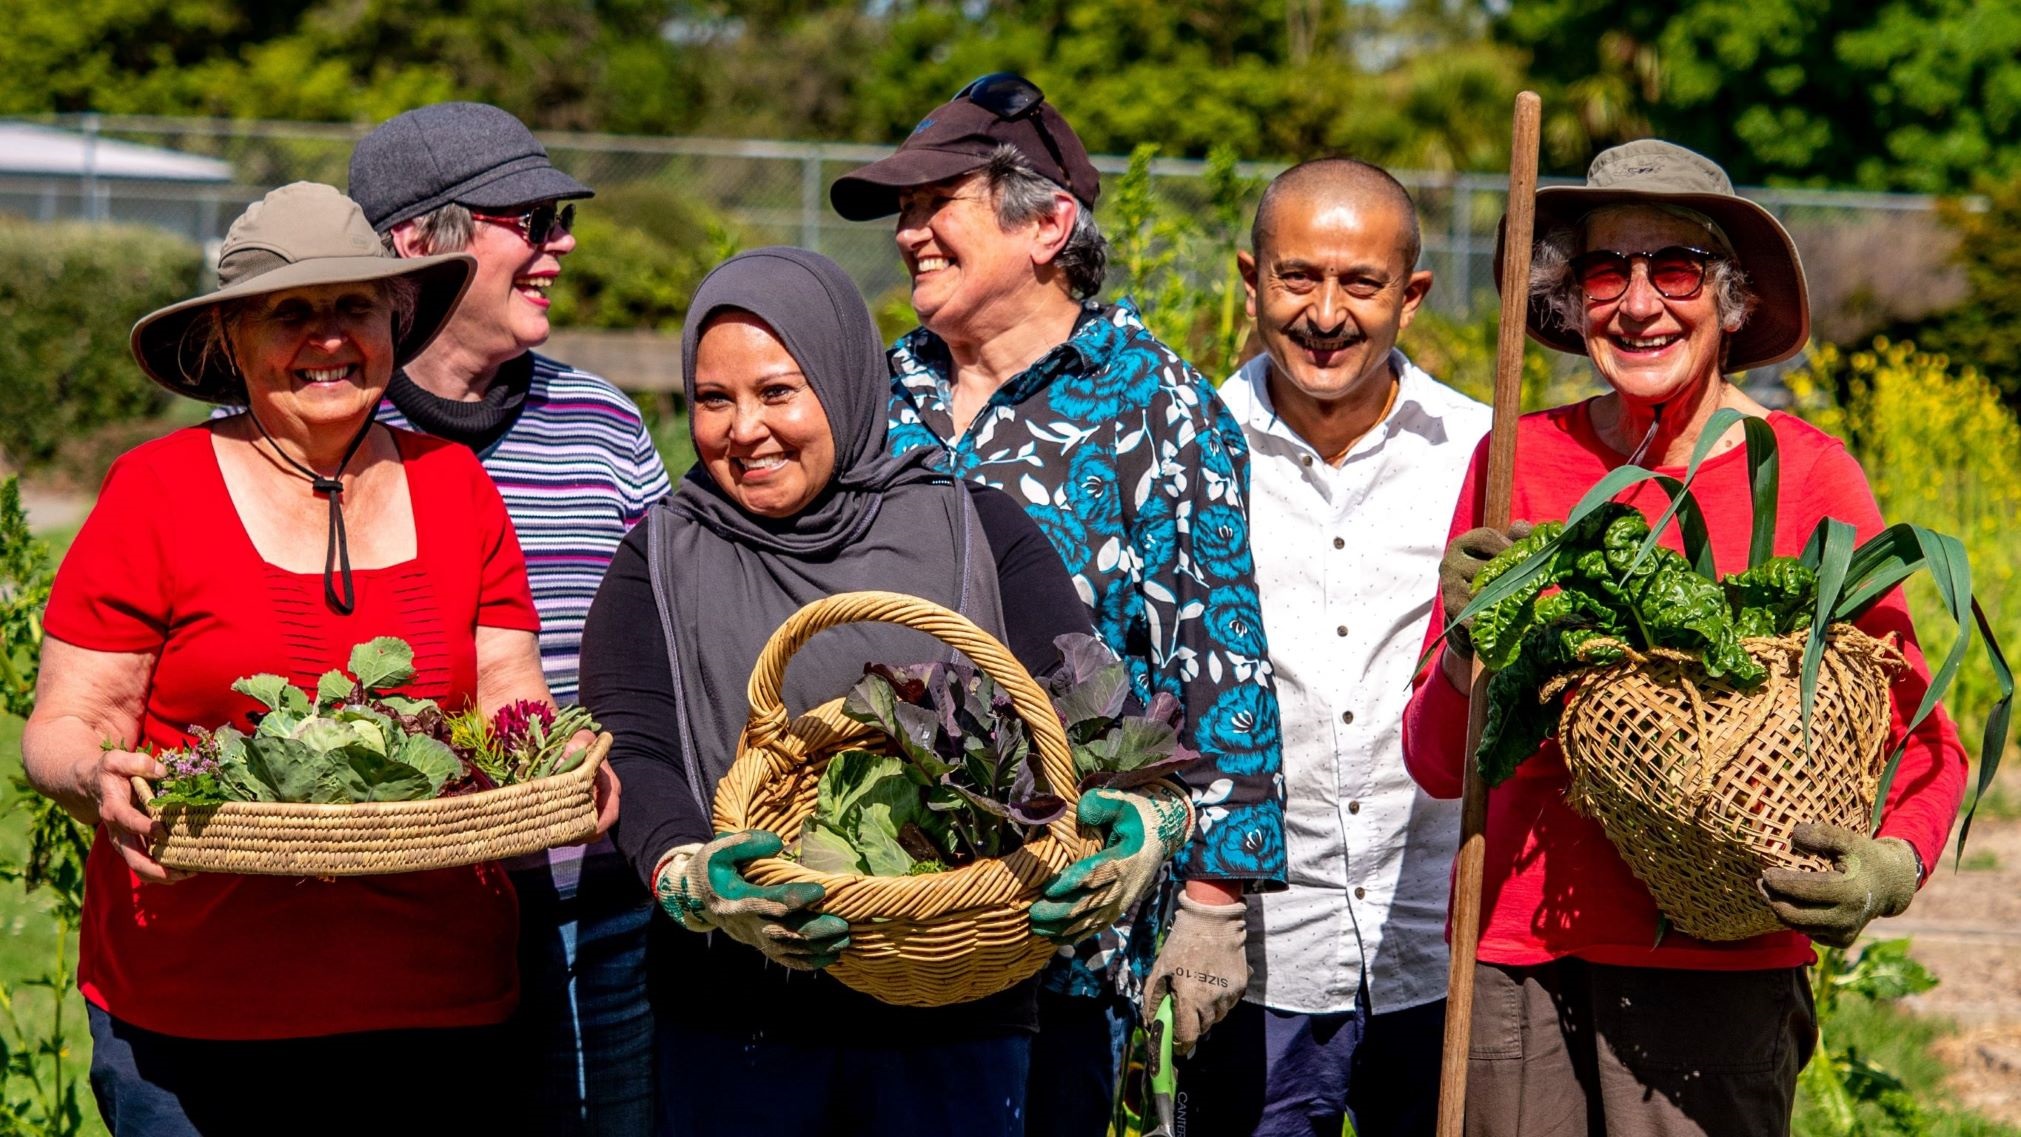 Photo shows six smiling gardeners standing in a community garden holding baskets of fresh vegetables.